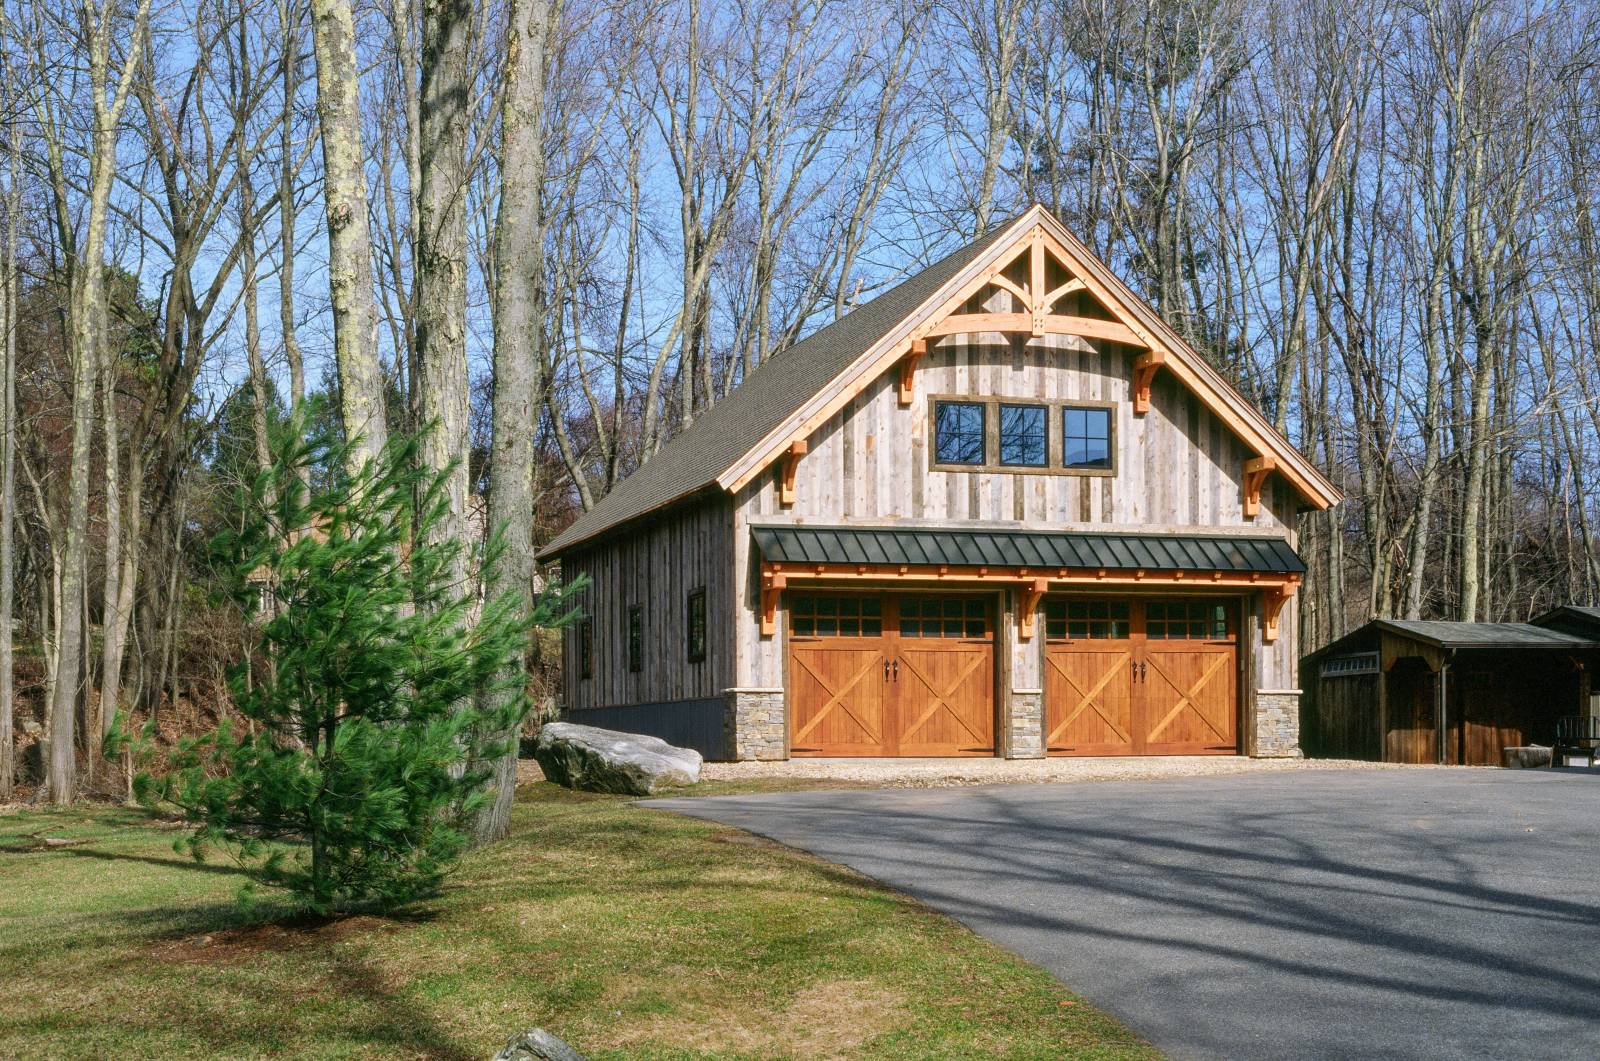 28' x 40' Carriage Barn (Tolland CT)